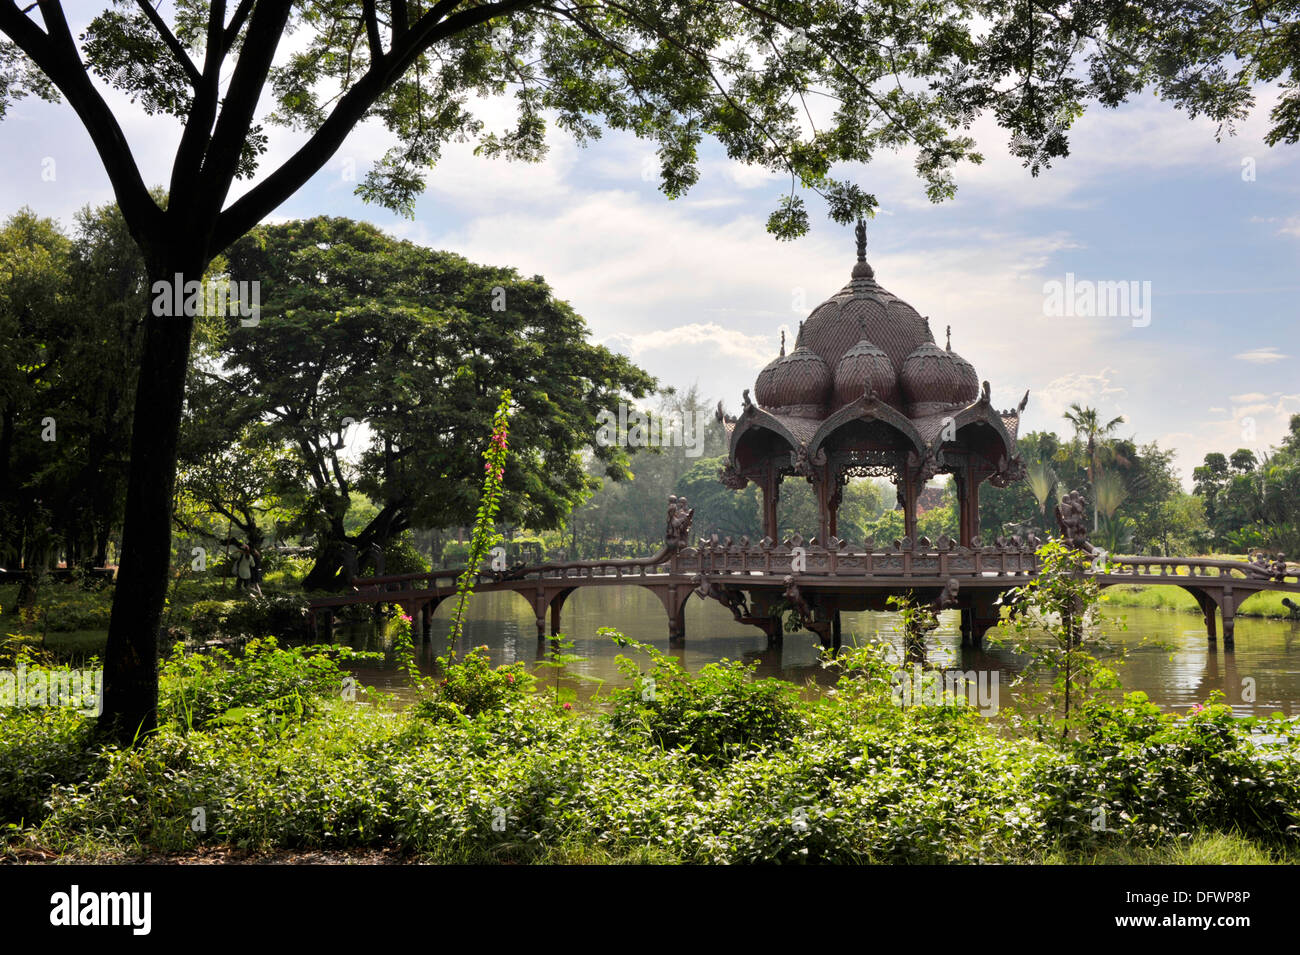 Ornate bridge crossing to the Garden Of The God at Thailand's Ancient Siam attraction near Bangkok. Stock Photo